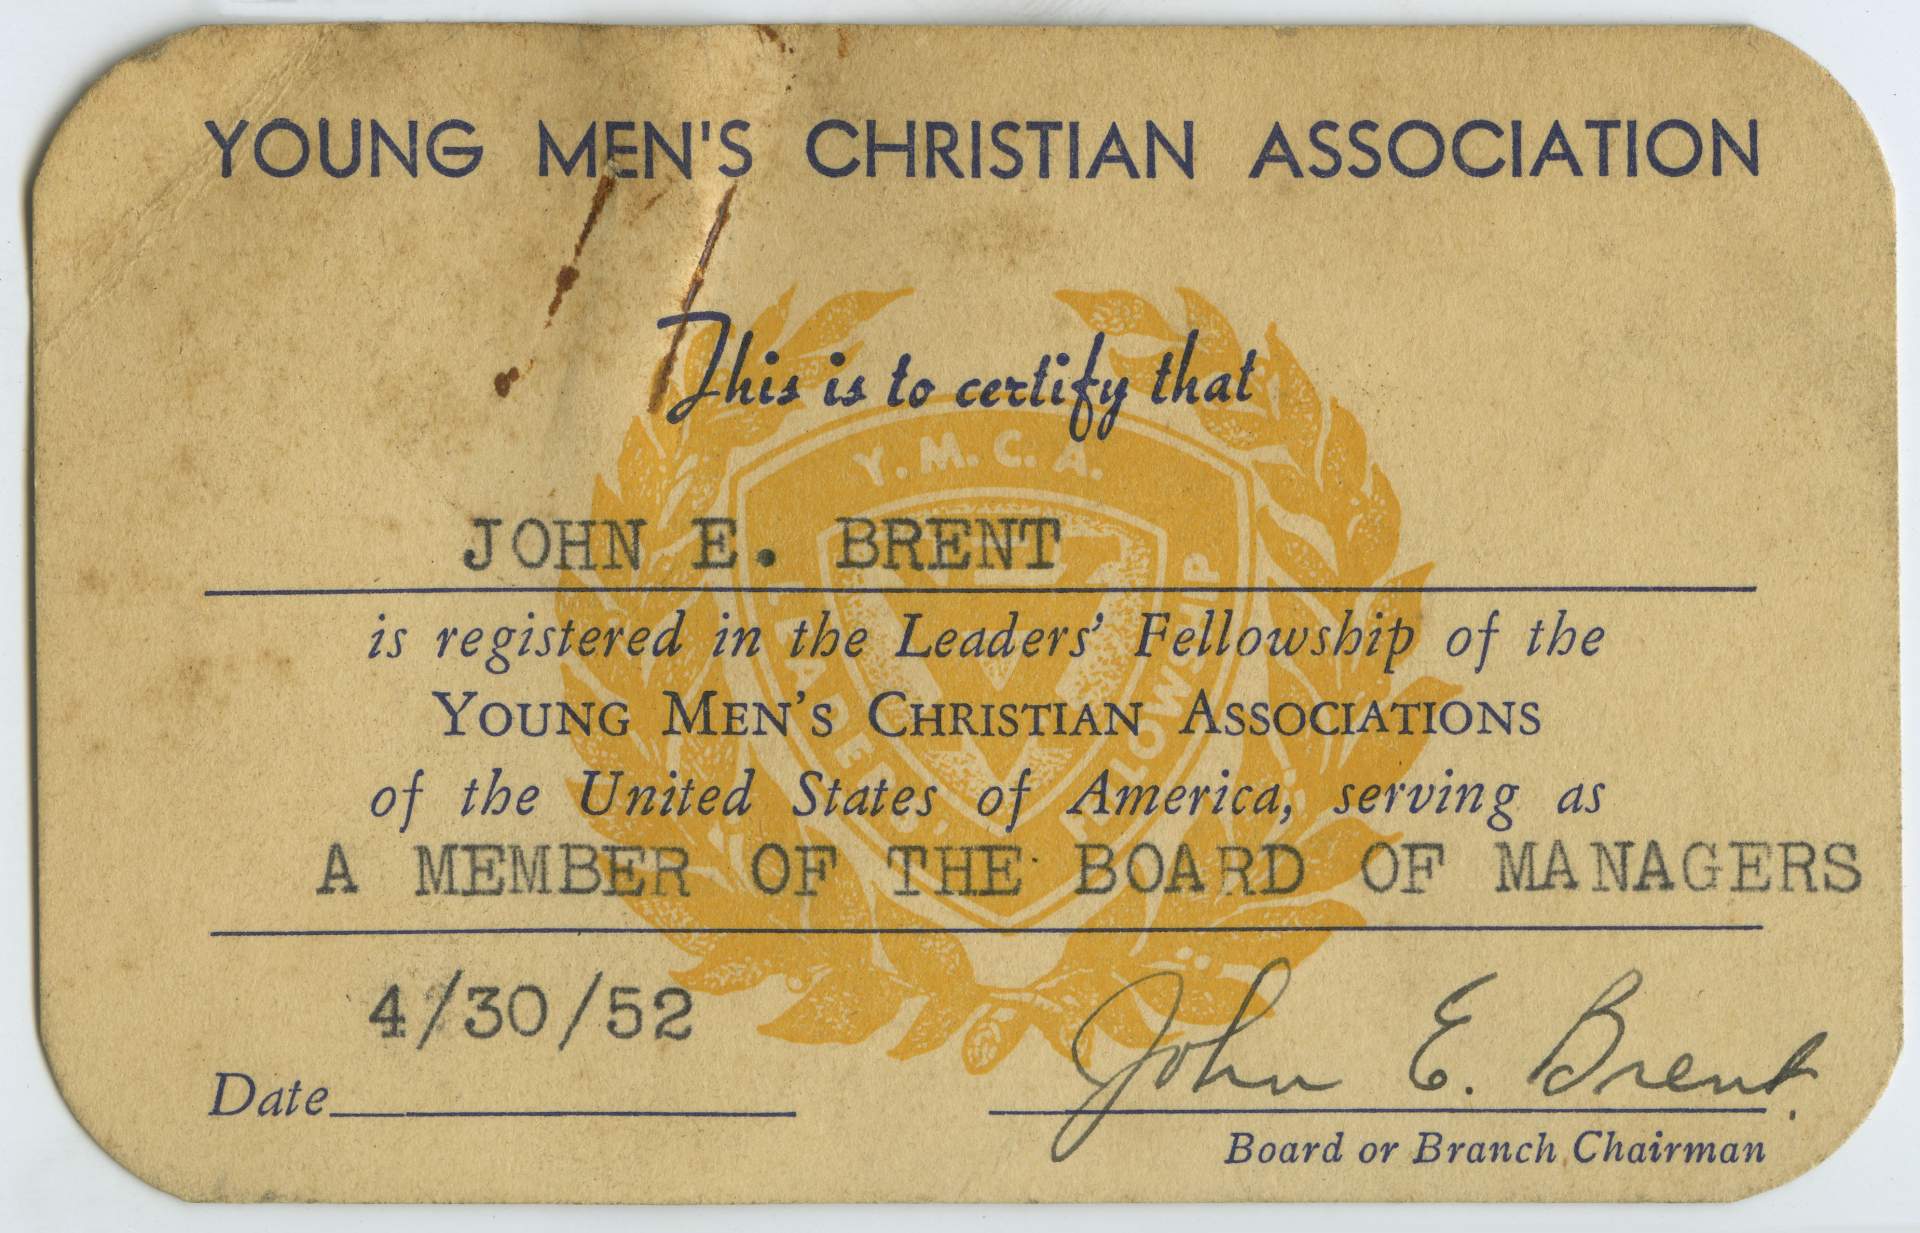 Young Men’s Christian Association, Member of the Board of Managers Card